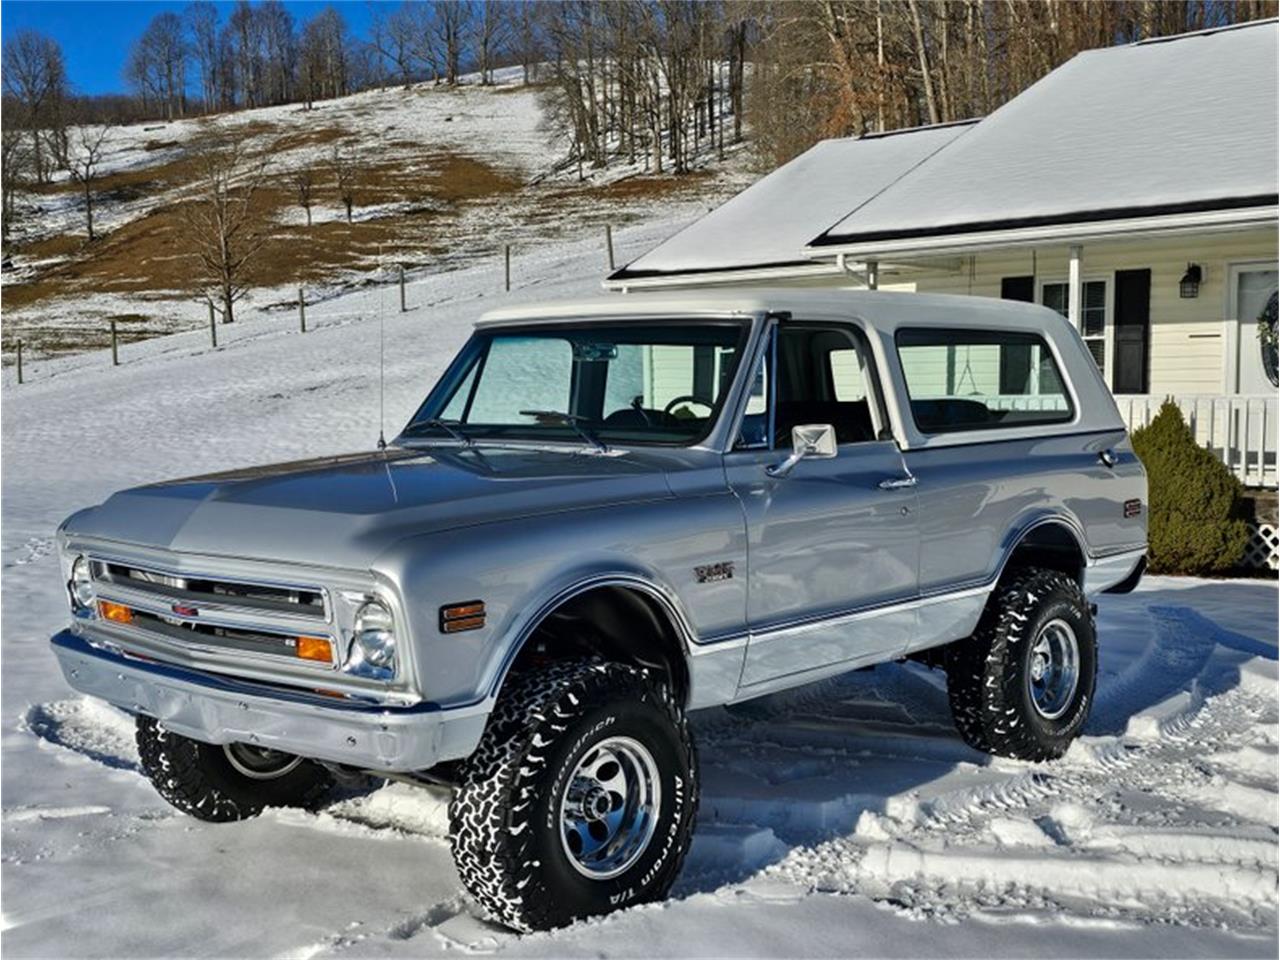 For Sale at Auction: 1971 GMC Jimmy in Greensboro, North Carolina for sale in Greensboro, NC